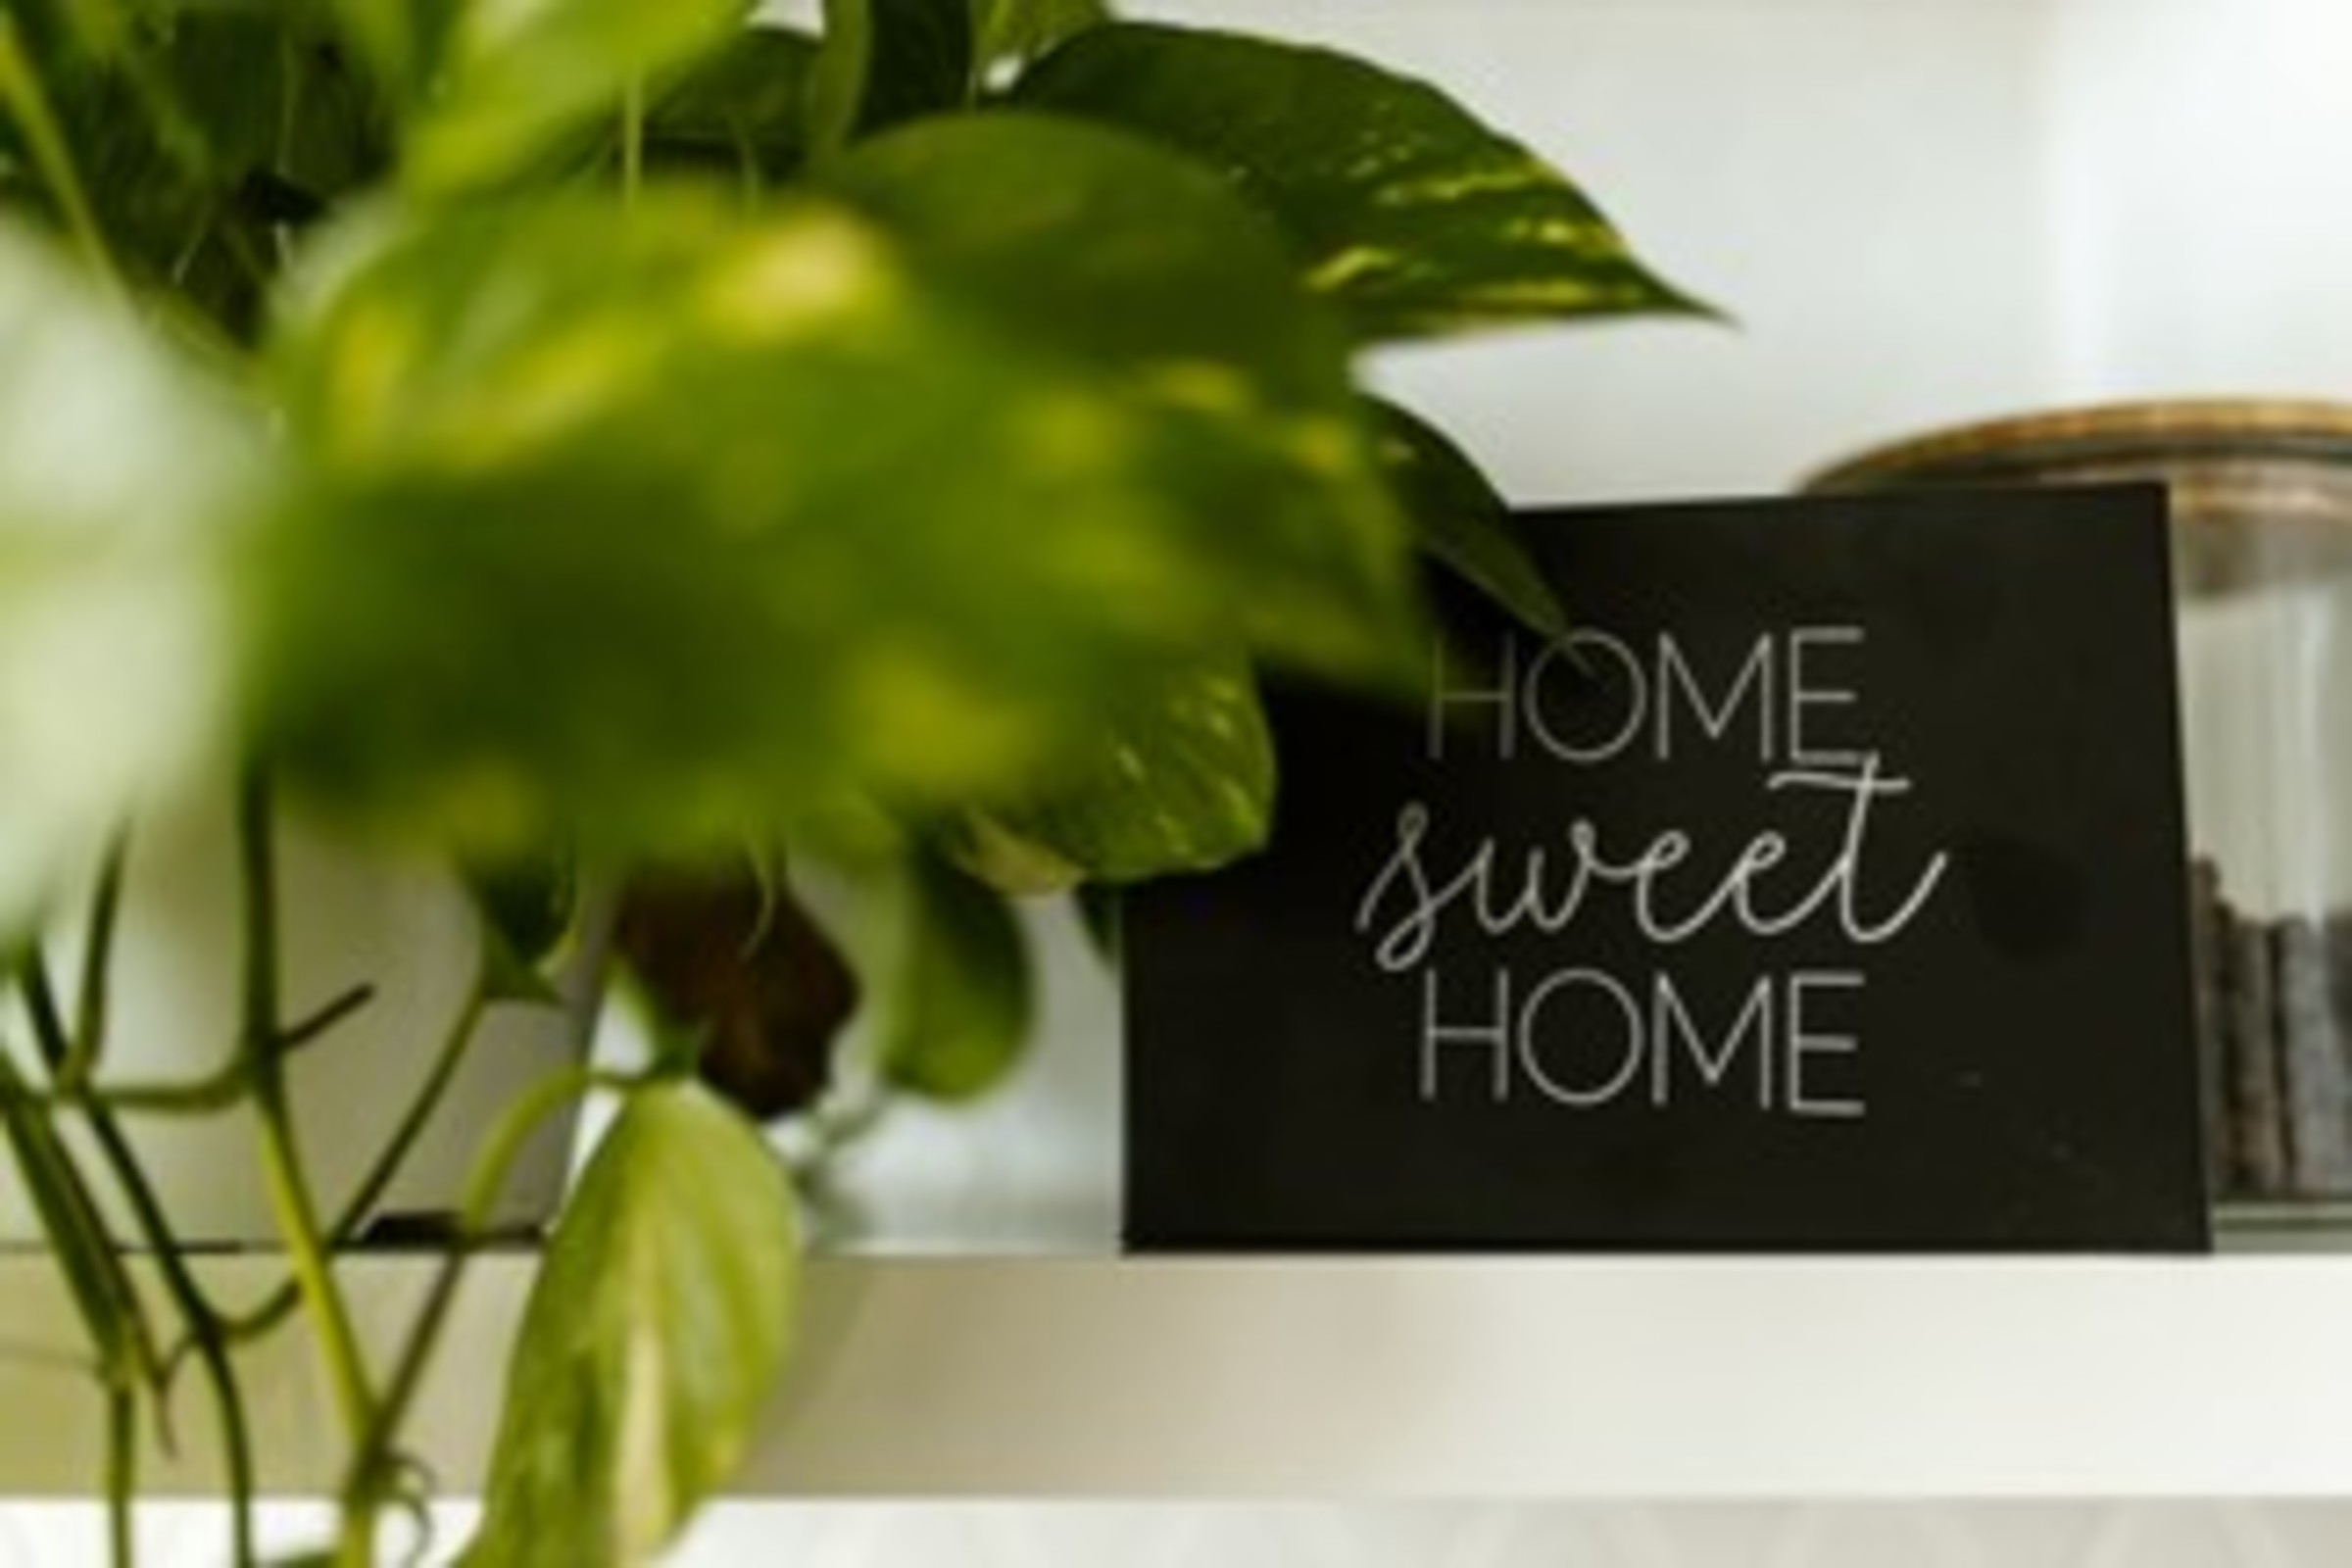 Home Sweet Home - Photo Courtesy of RDNE from Pexels